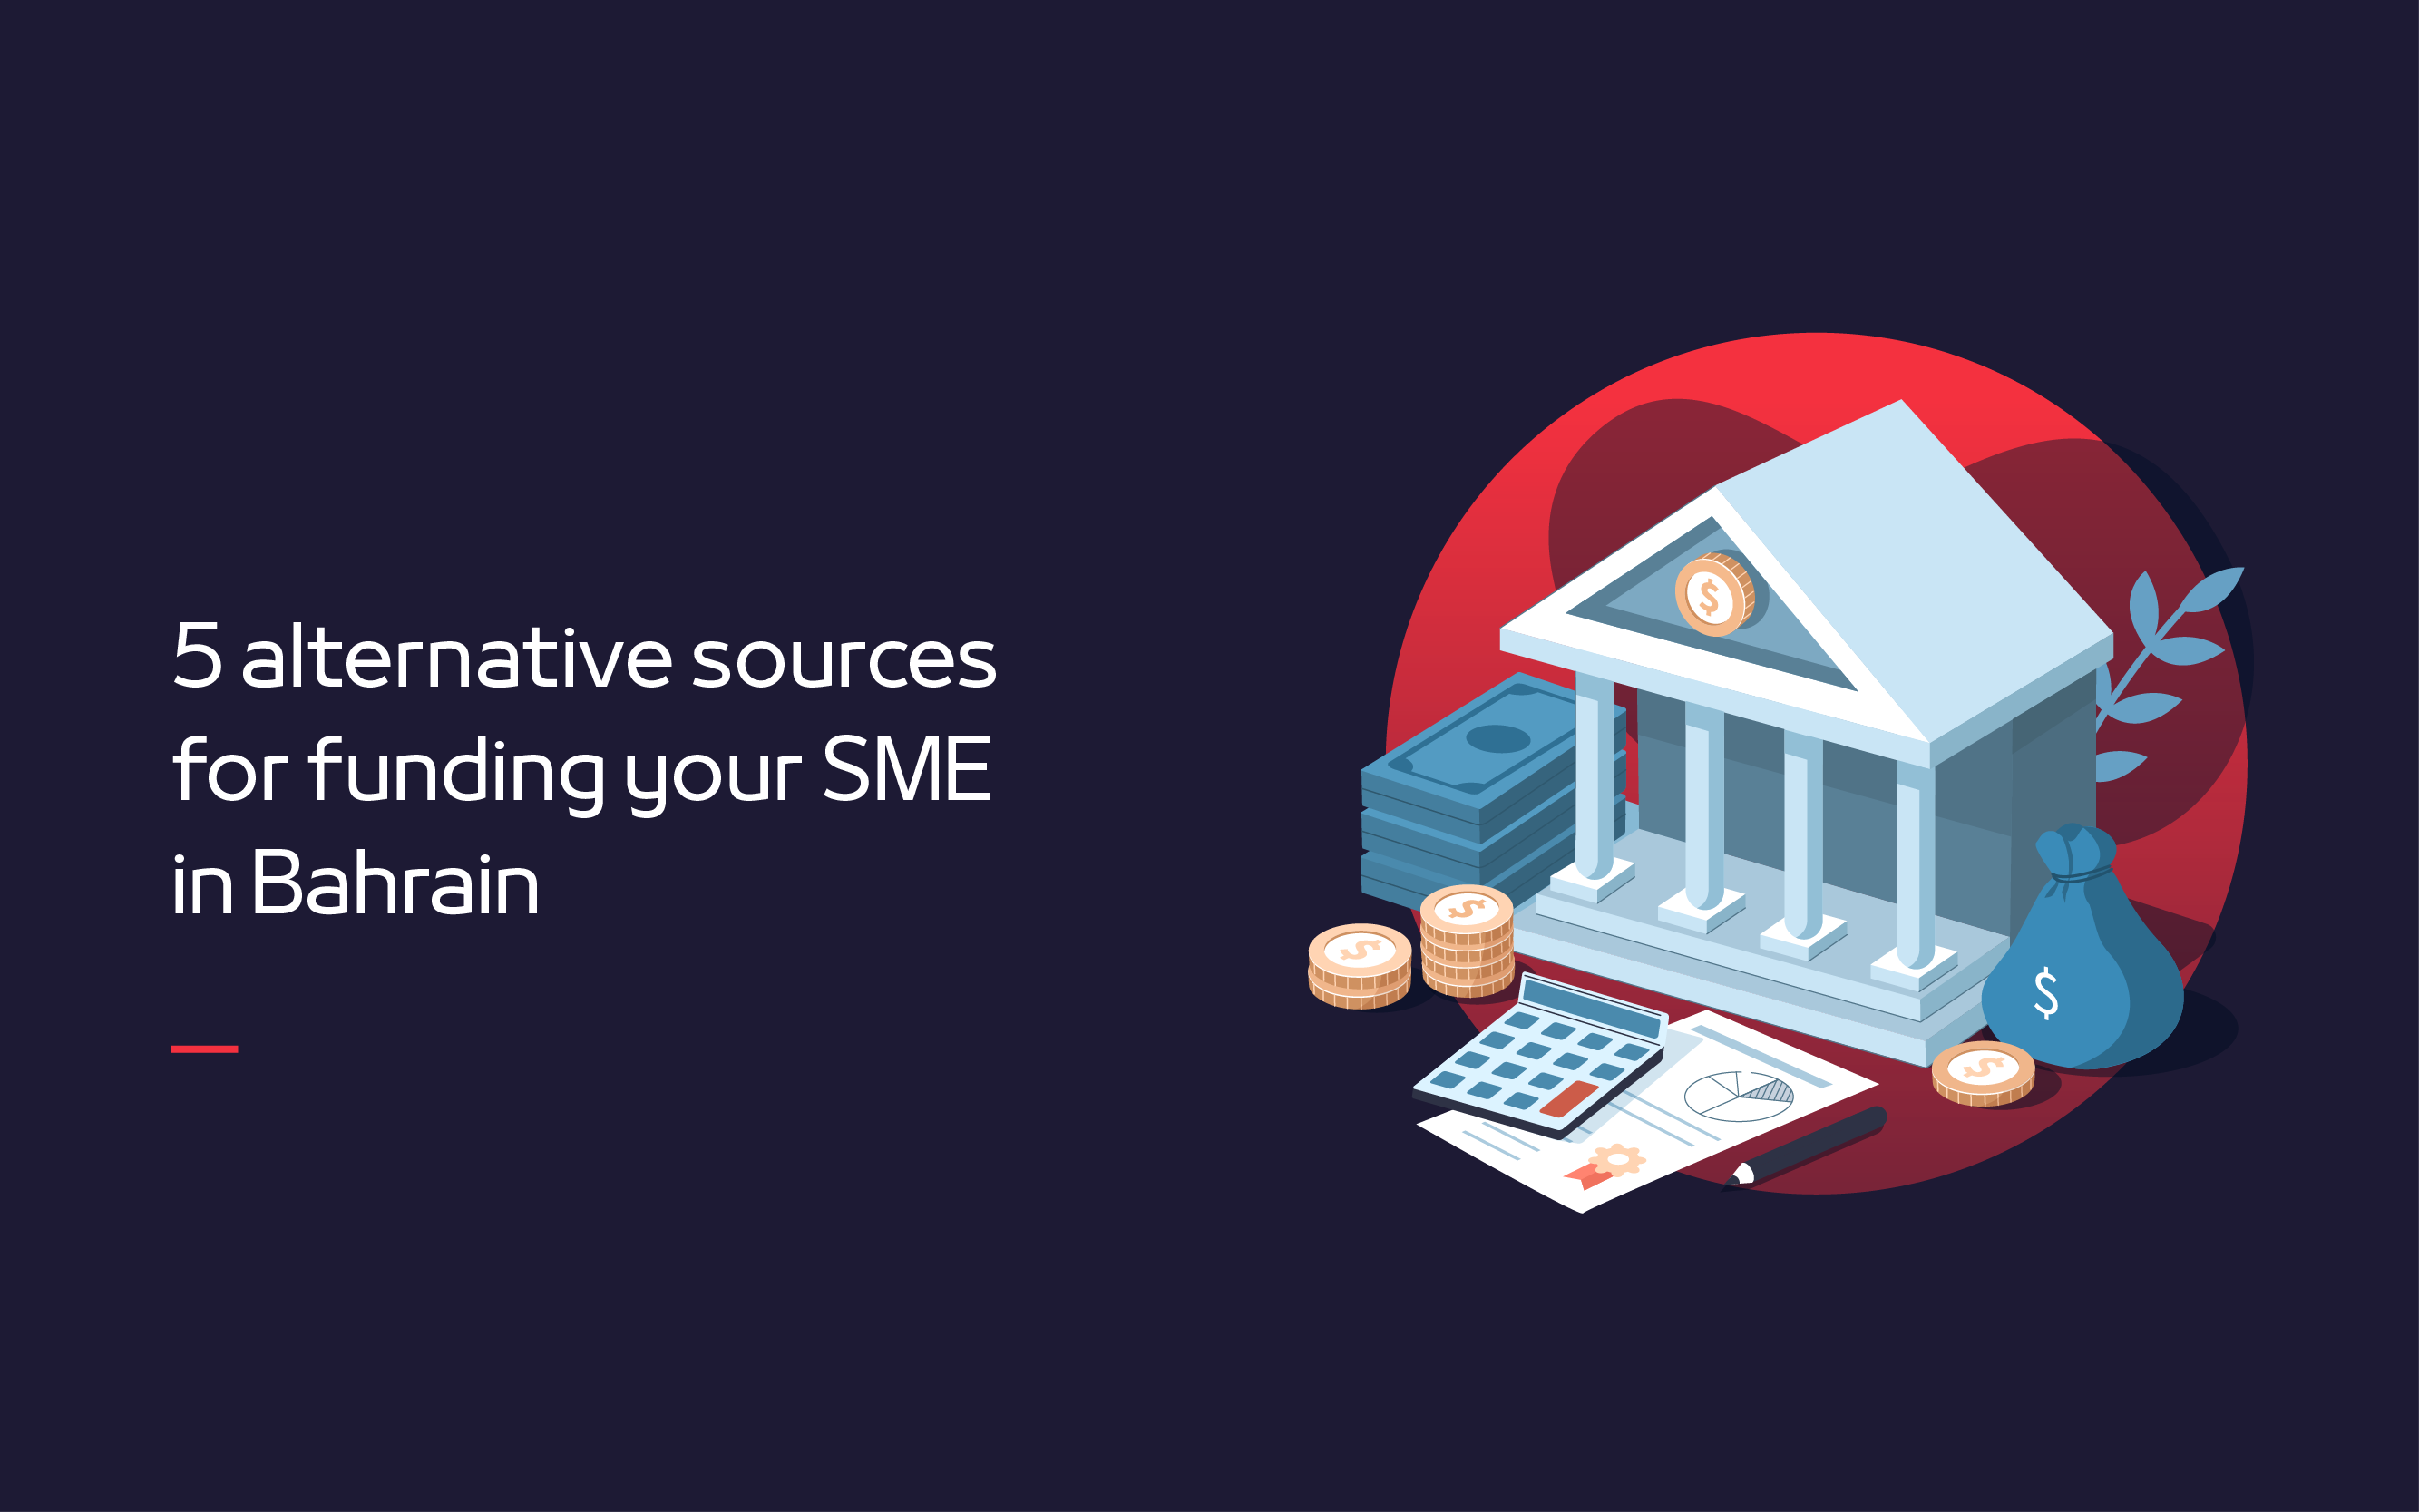 5 alternative sources for funding your SME in Bahrain